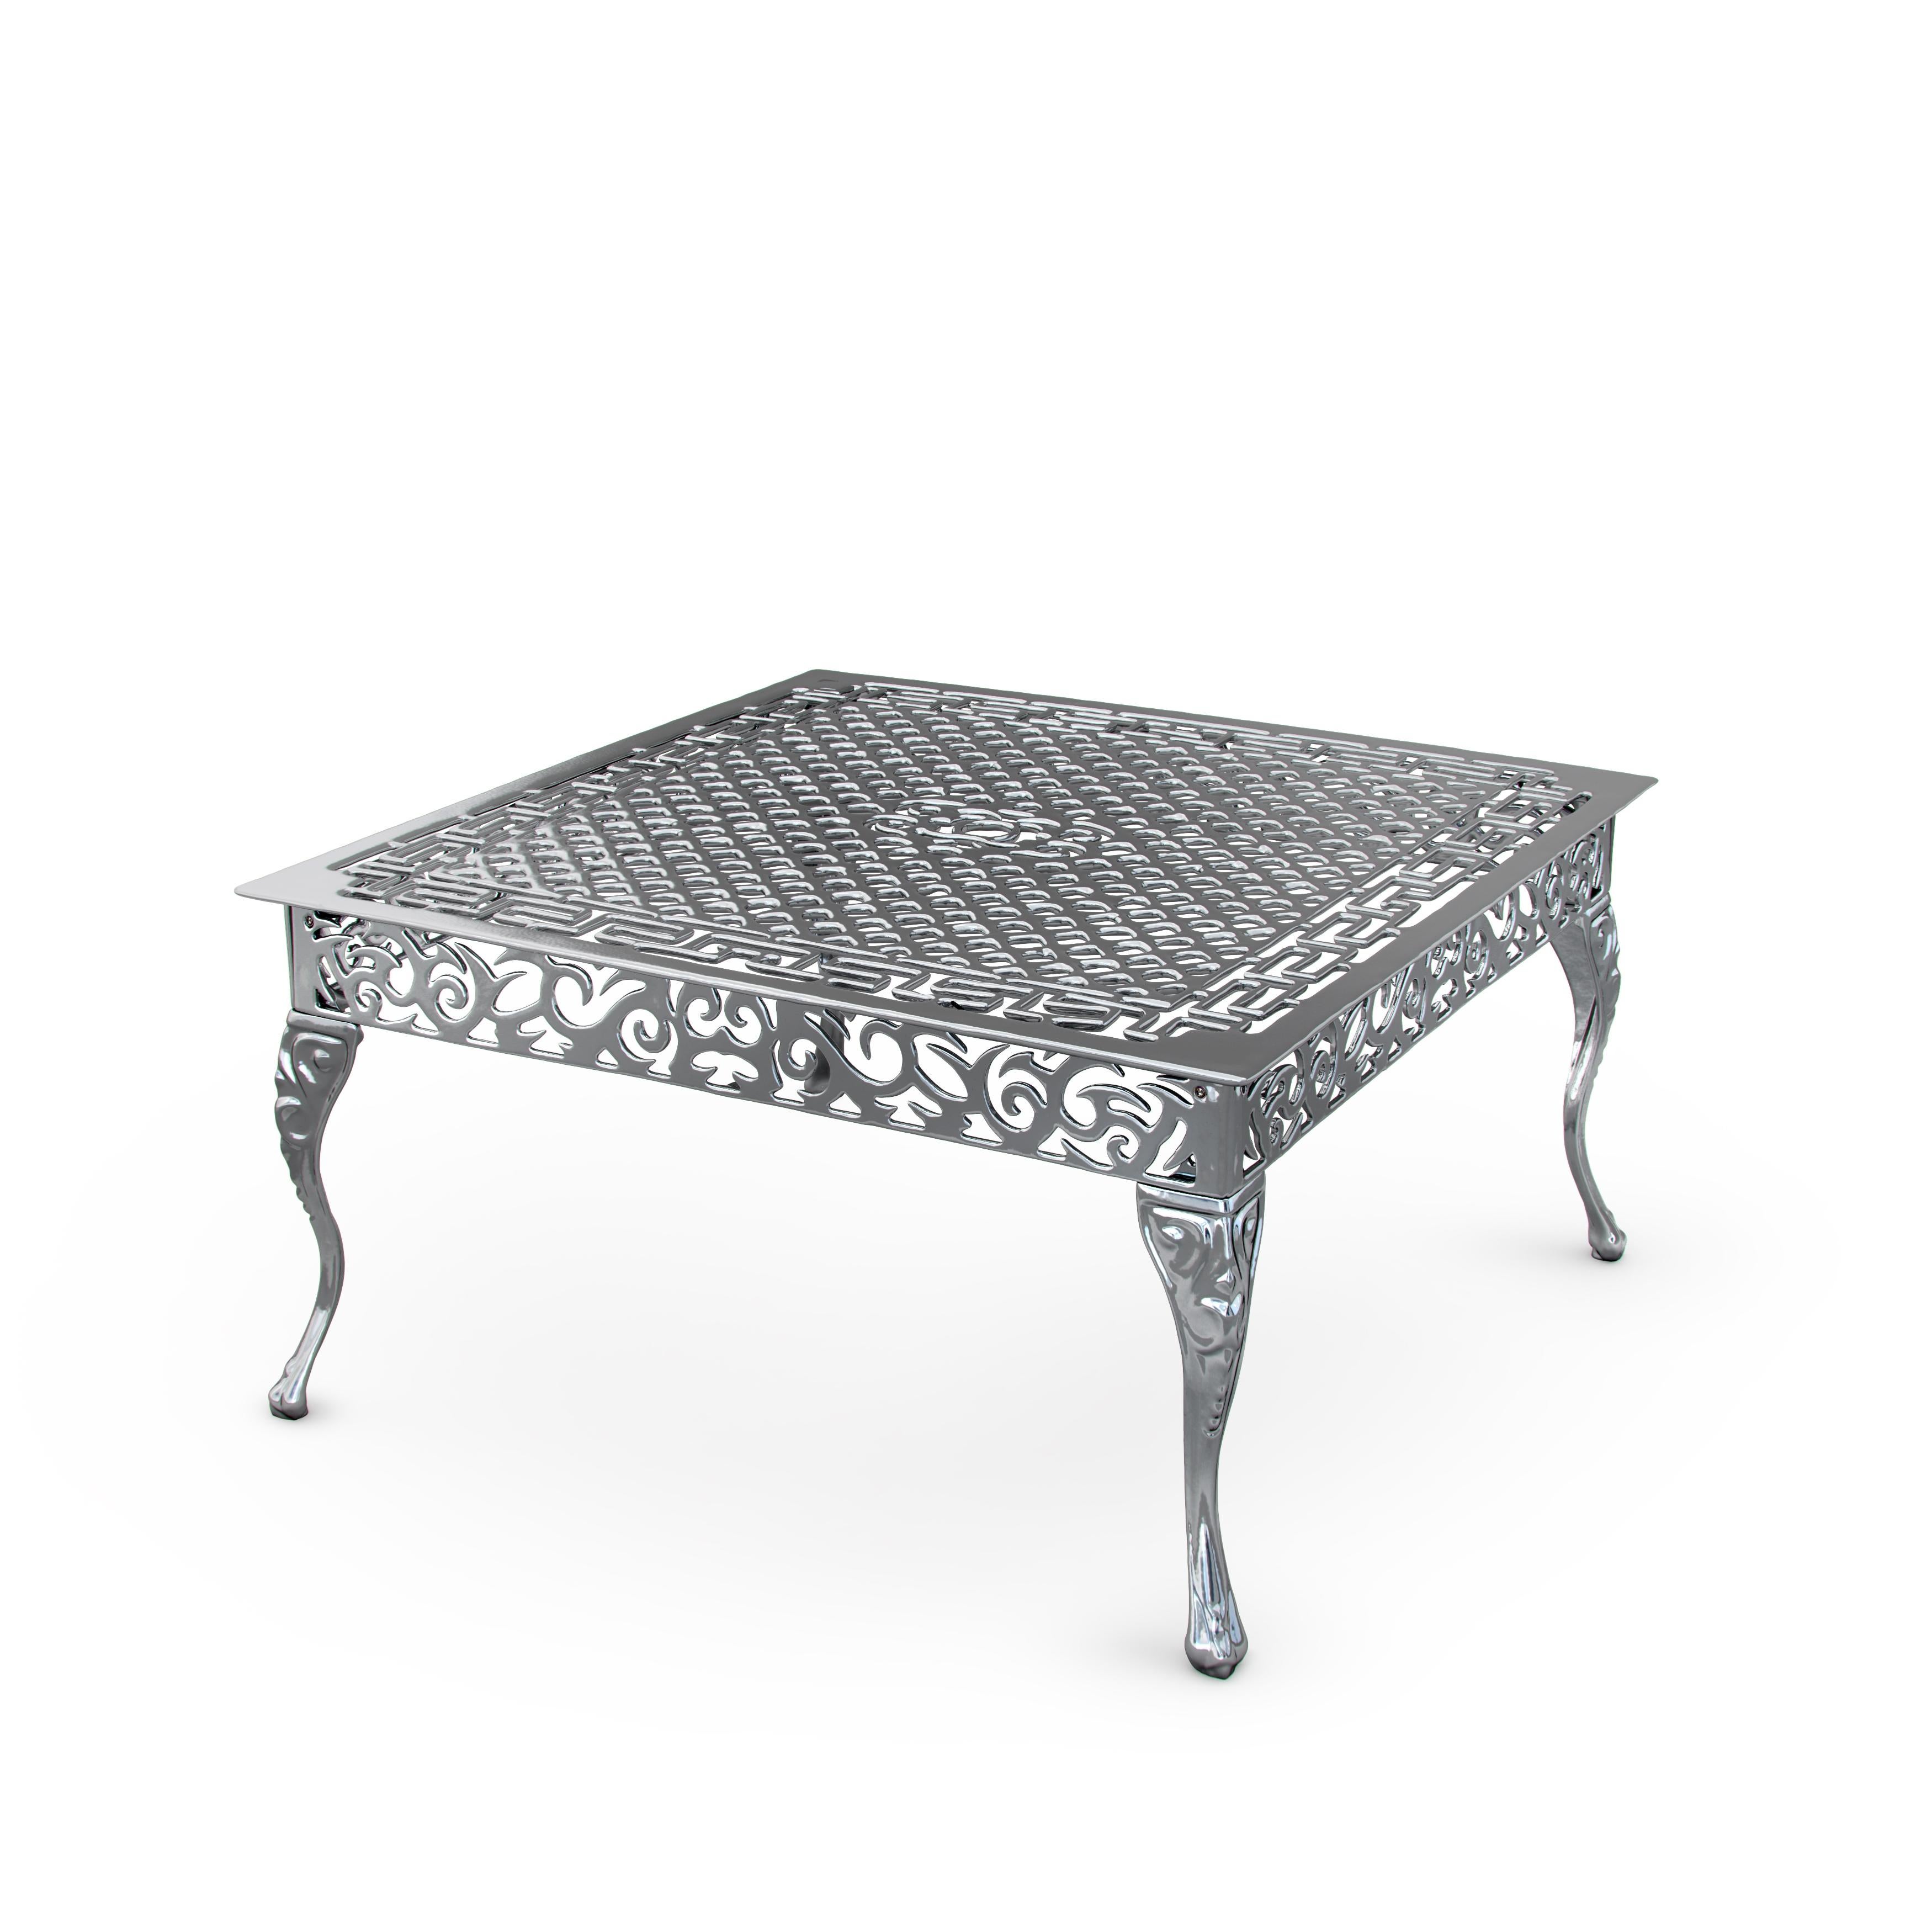 Modern Cama, Outdoor Aluminum Coffee Table with Chrome Finish, Made in Italy For Sale